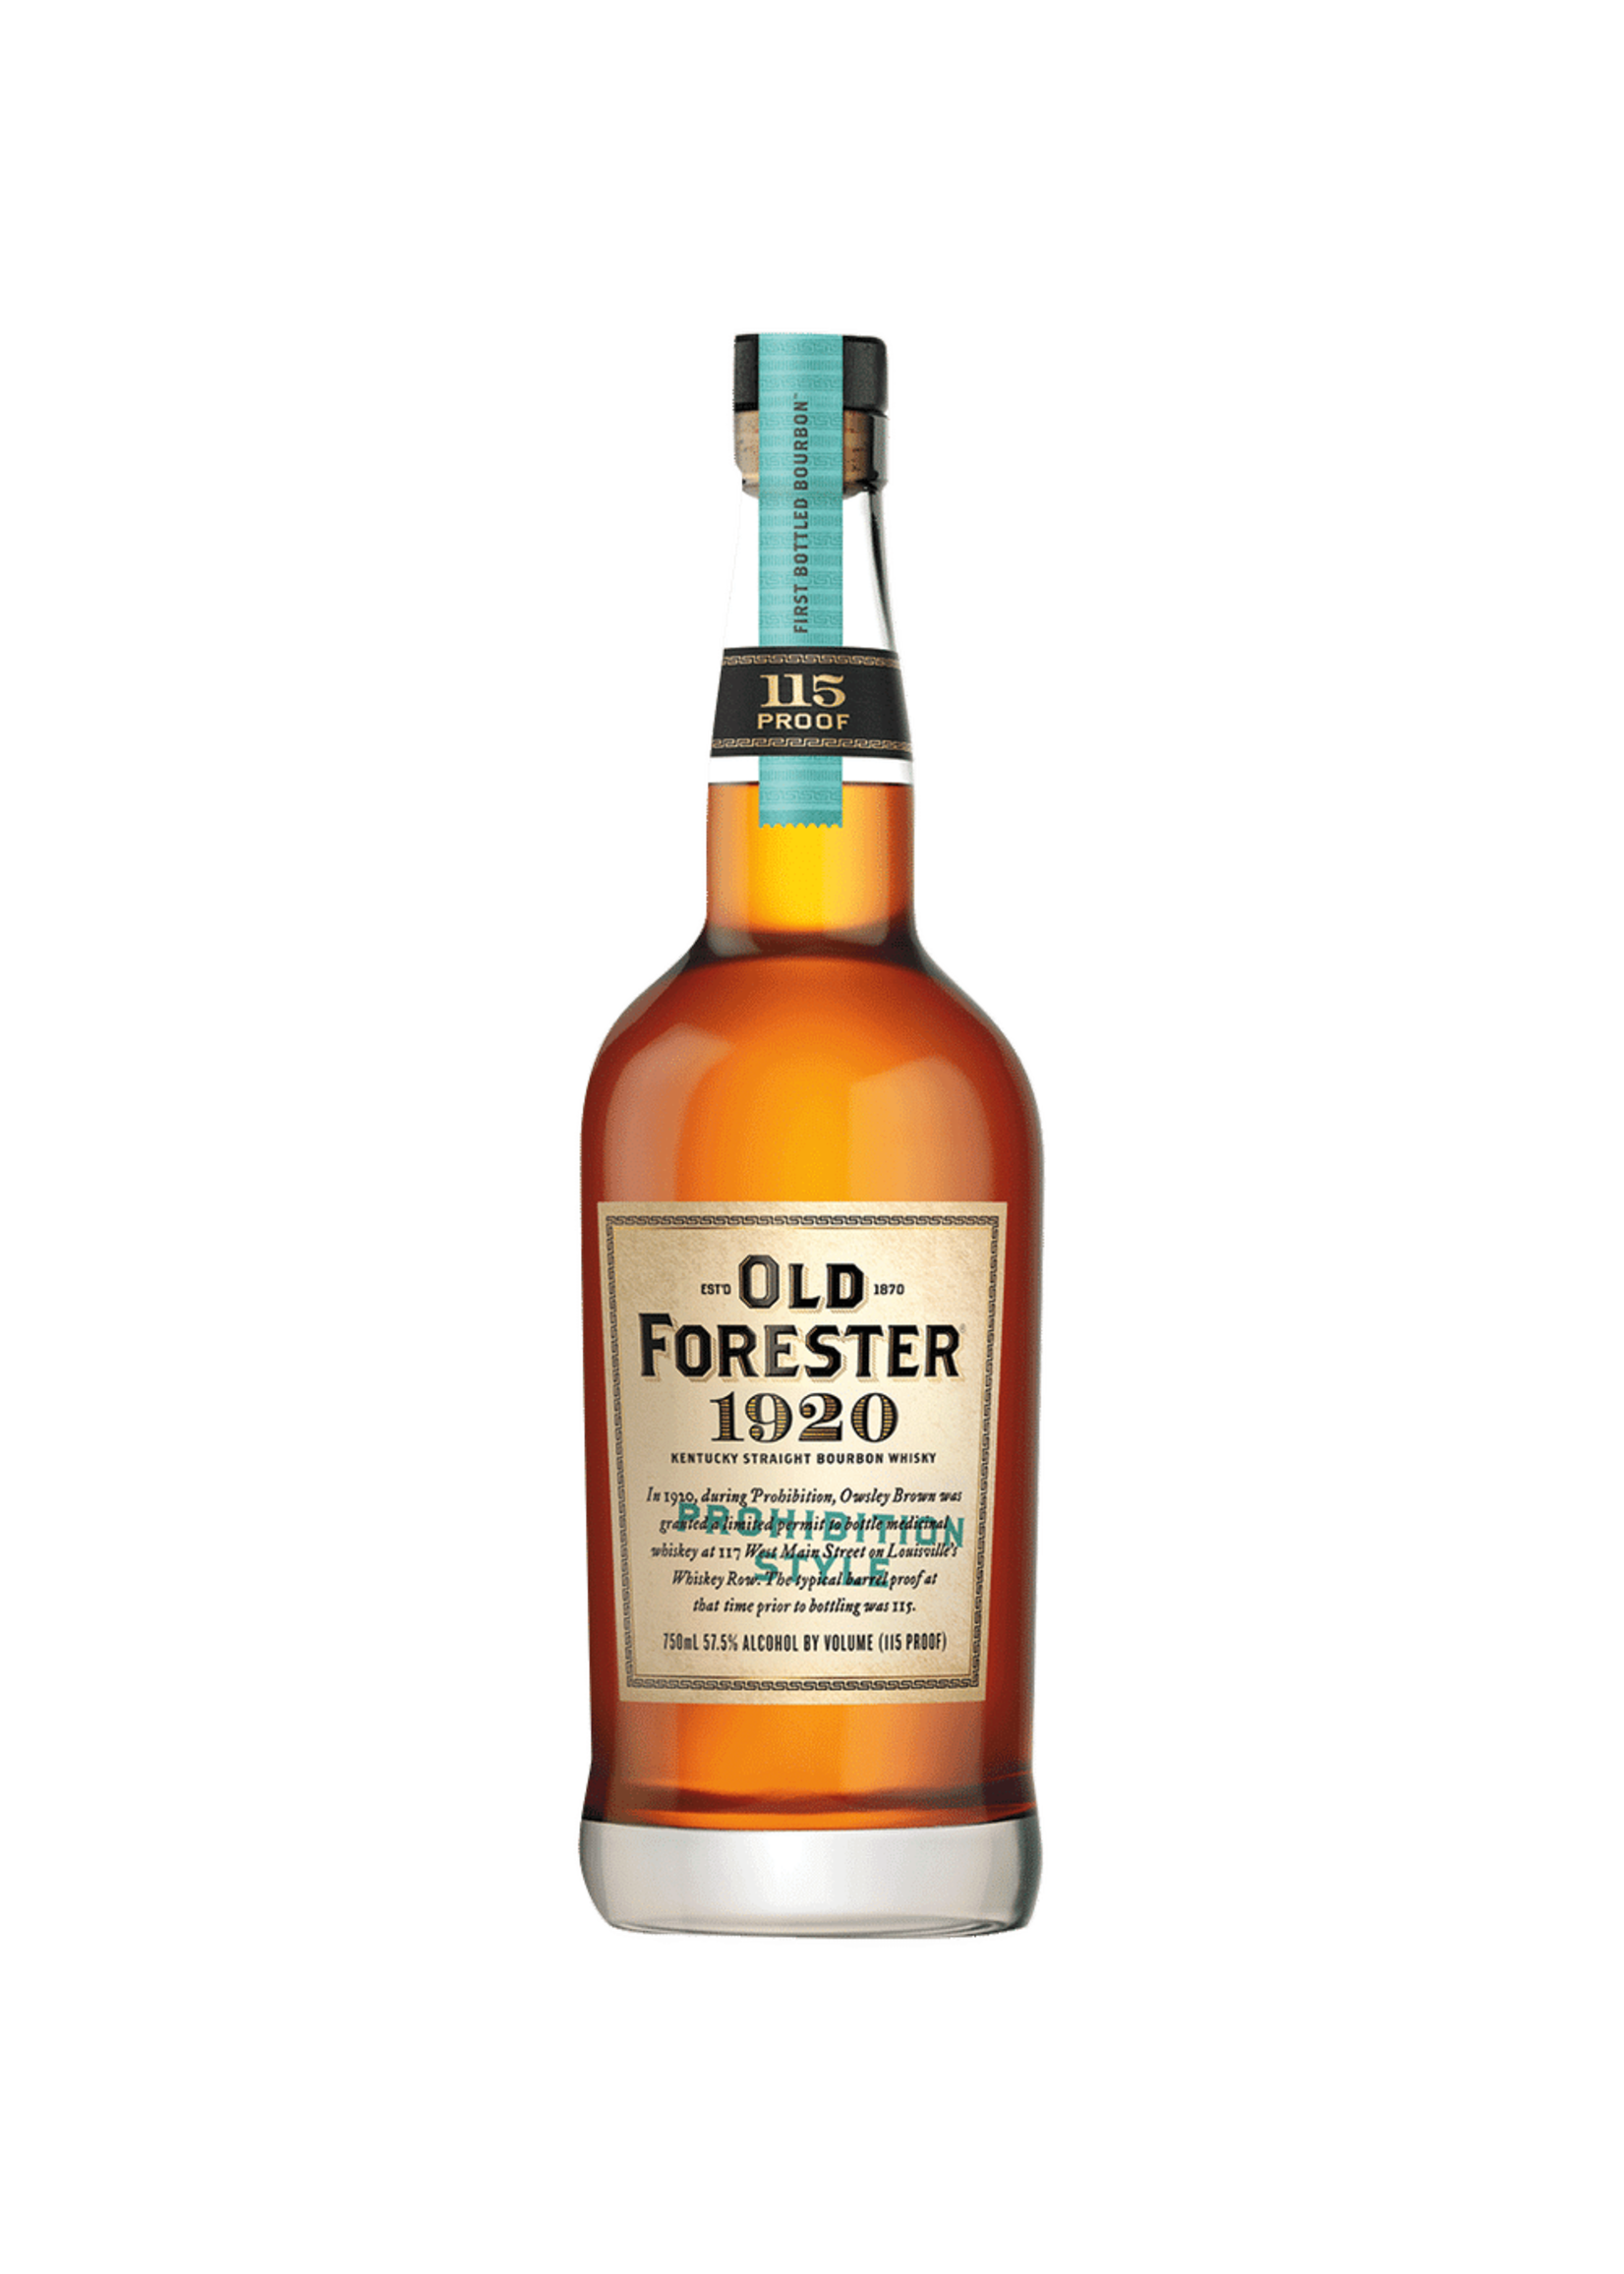 Old Forester Old Forester 1920 Prohibition Style 115Proof 750ml